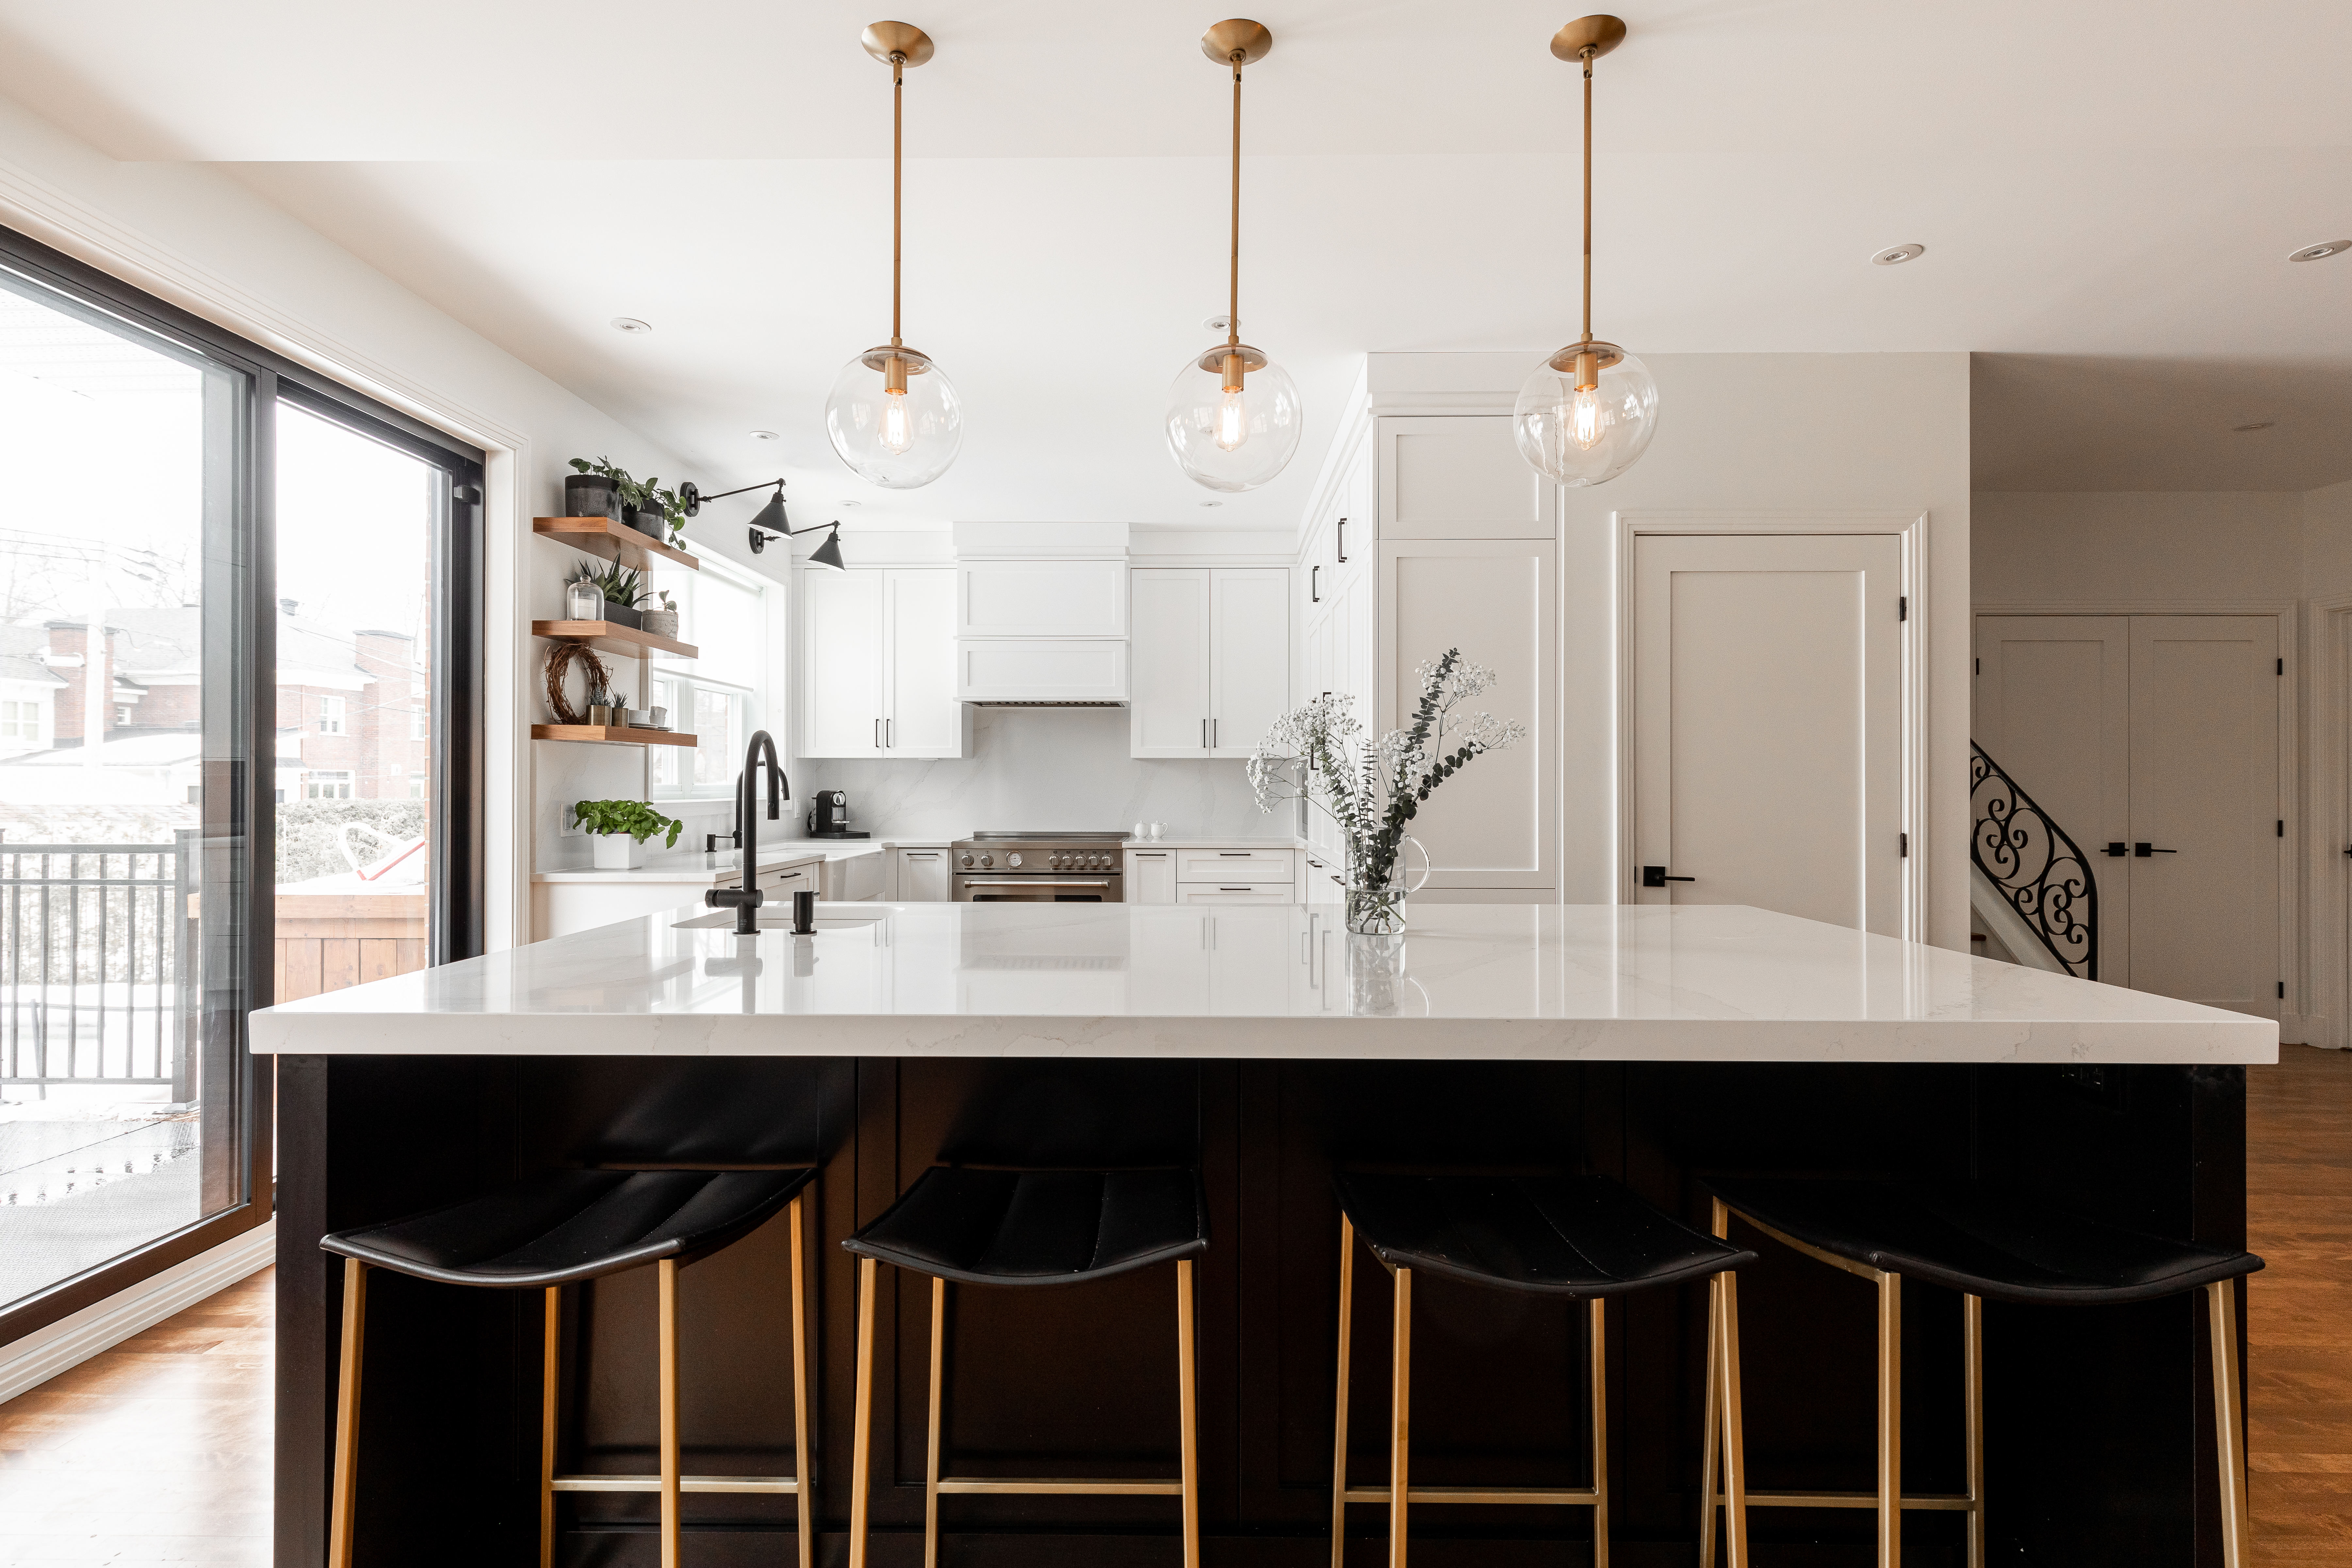 Modern kitchen. Golden-colored light fixtures are suspended above the central kitchen island.